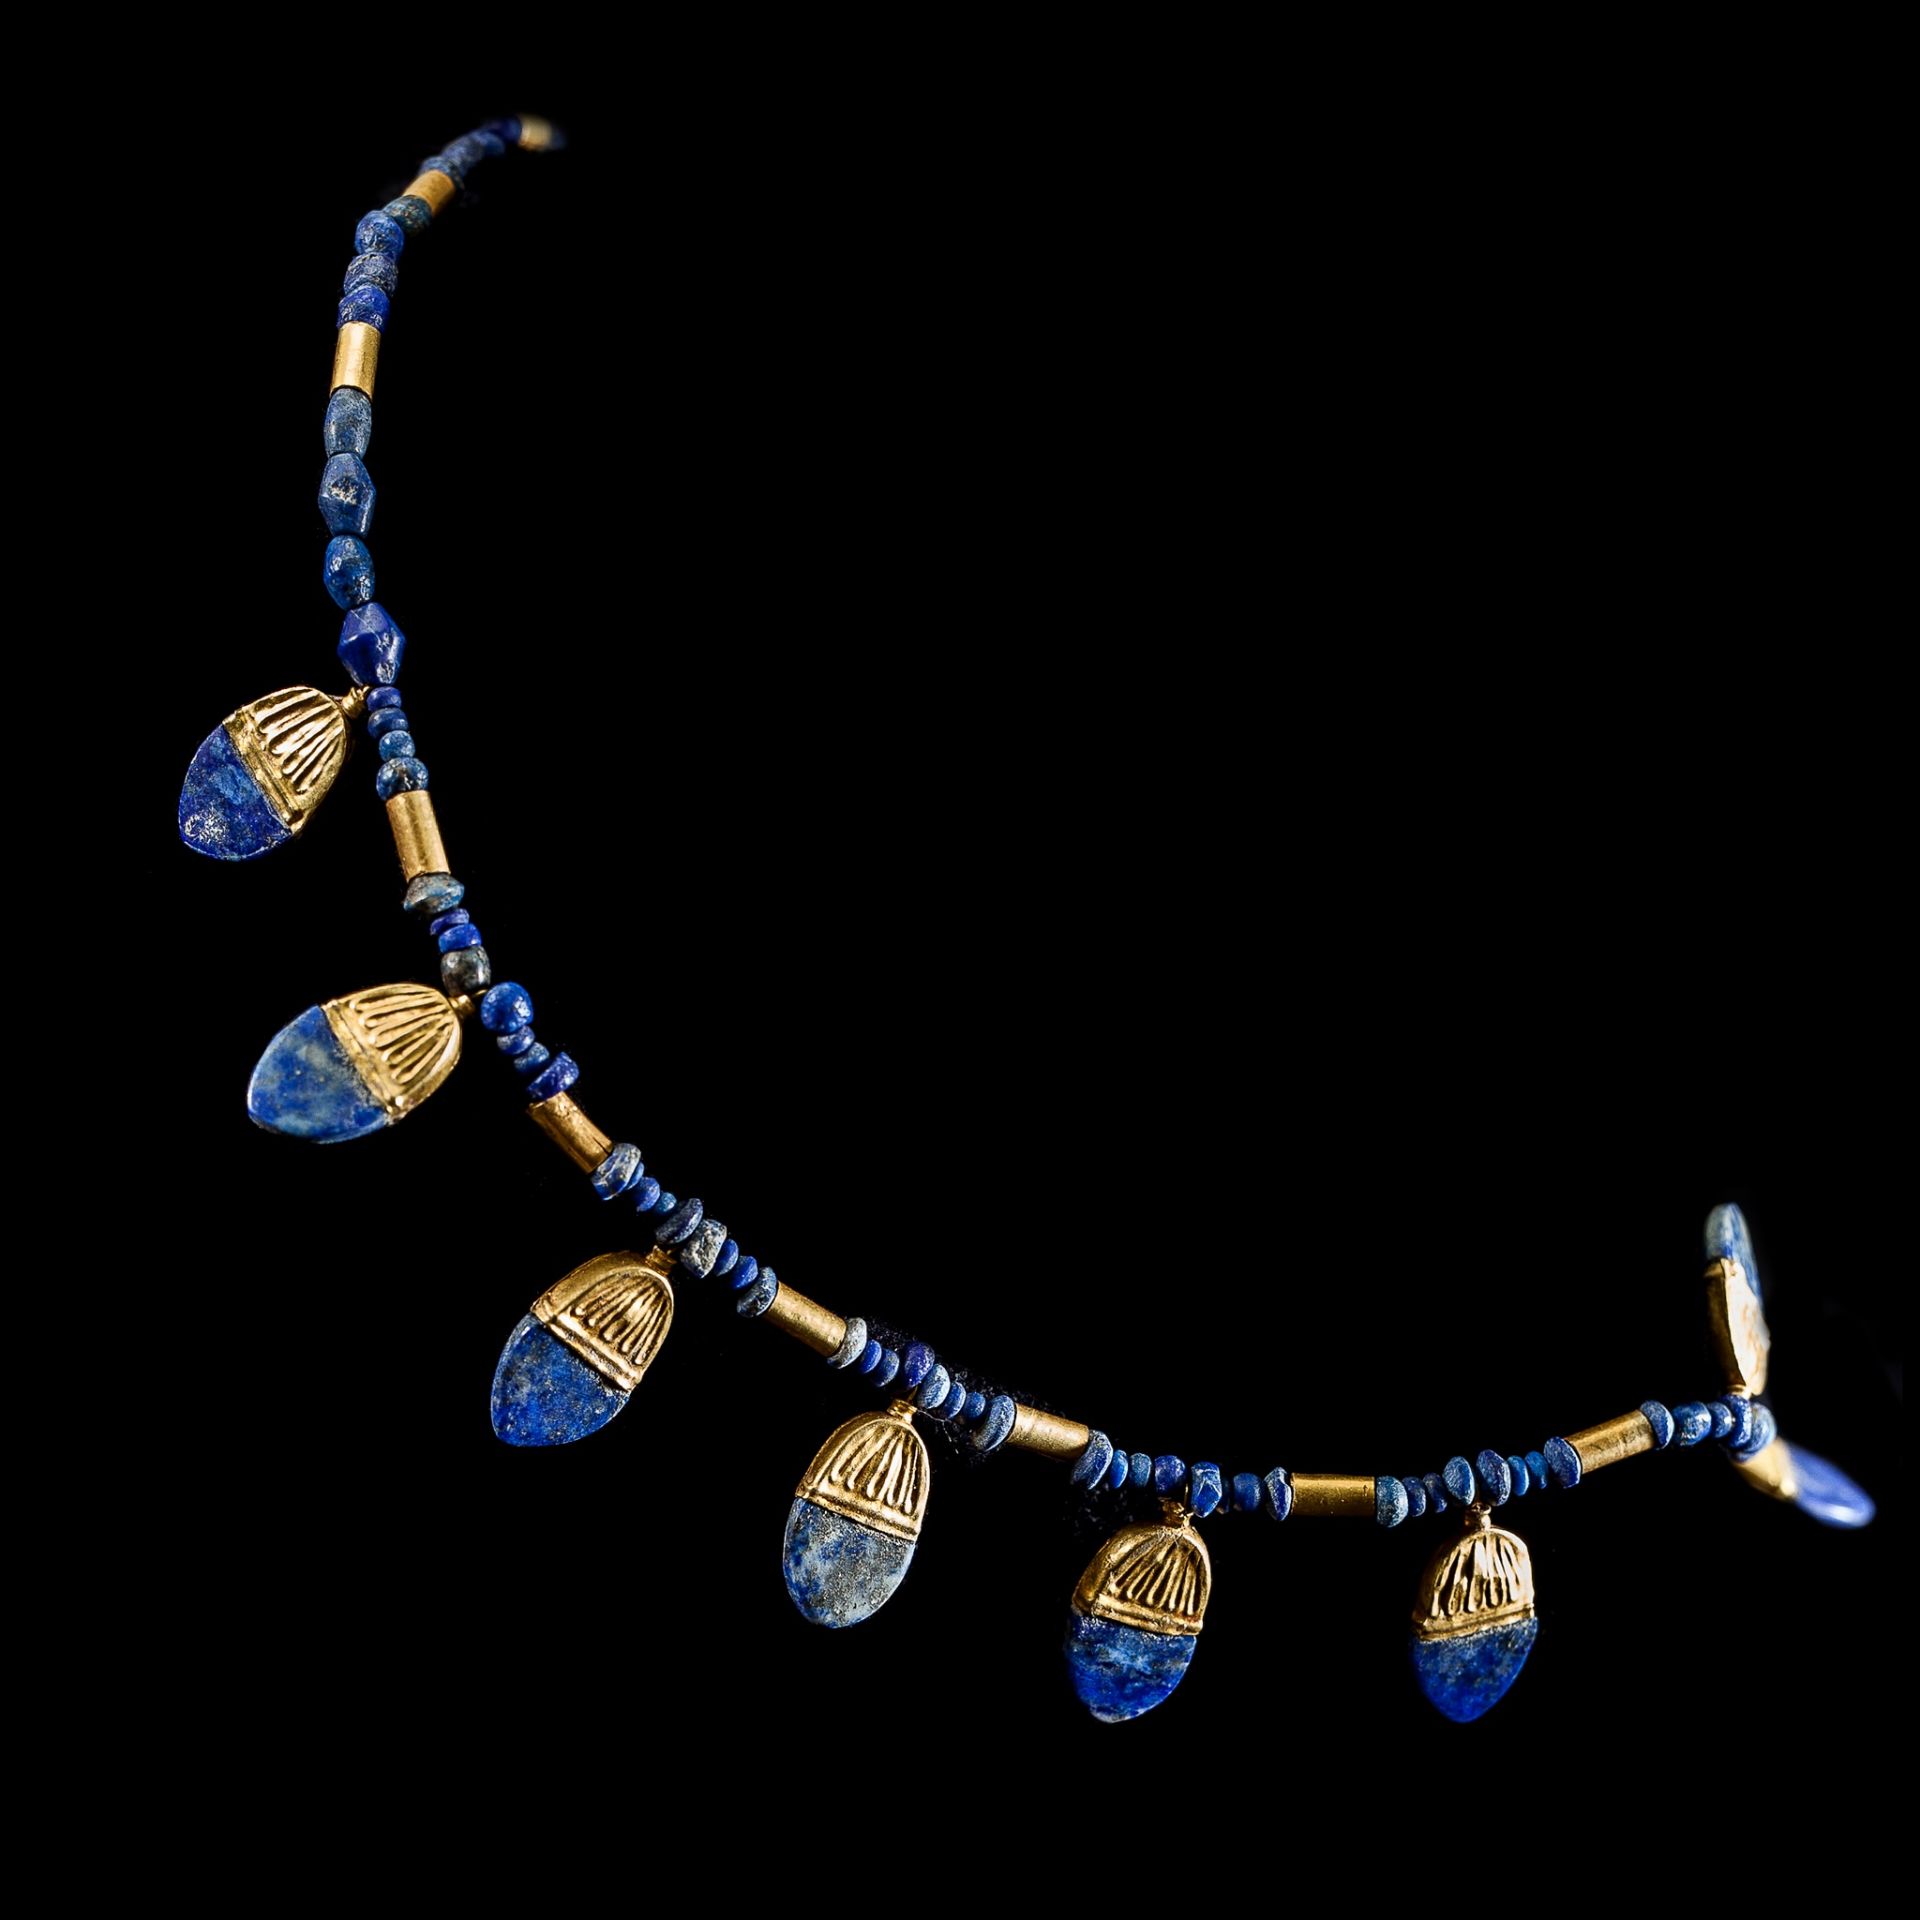 WESTERN ASIATIC LAPIS NECKLACE WITH GOLD PENDANTS NEAR EAST, 1ST MILLENNIUM B.C. - Image 3 of 3